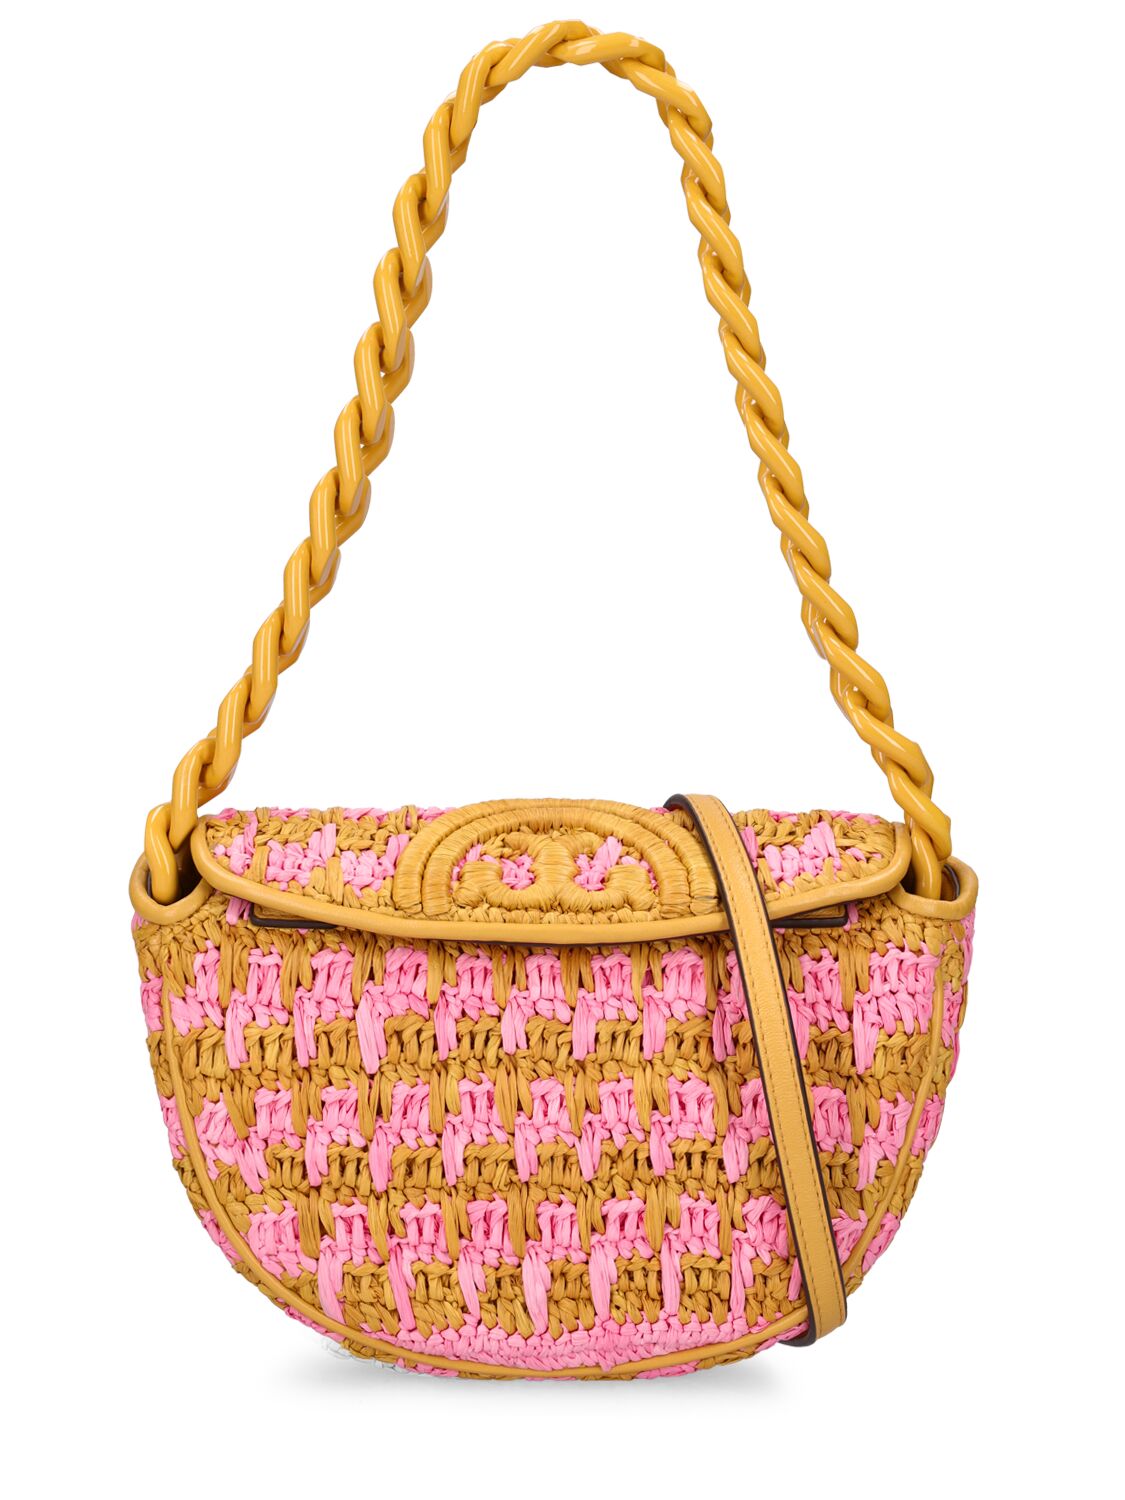 Tory Burch Mini Fleming Soft Crocheted Crescent Bag In Pink Carnation